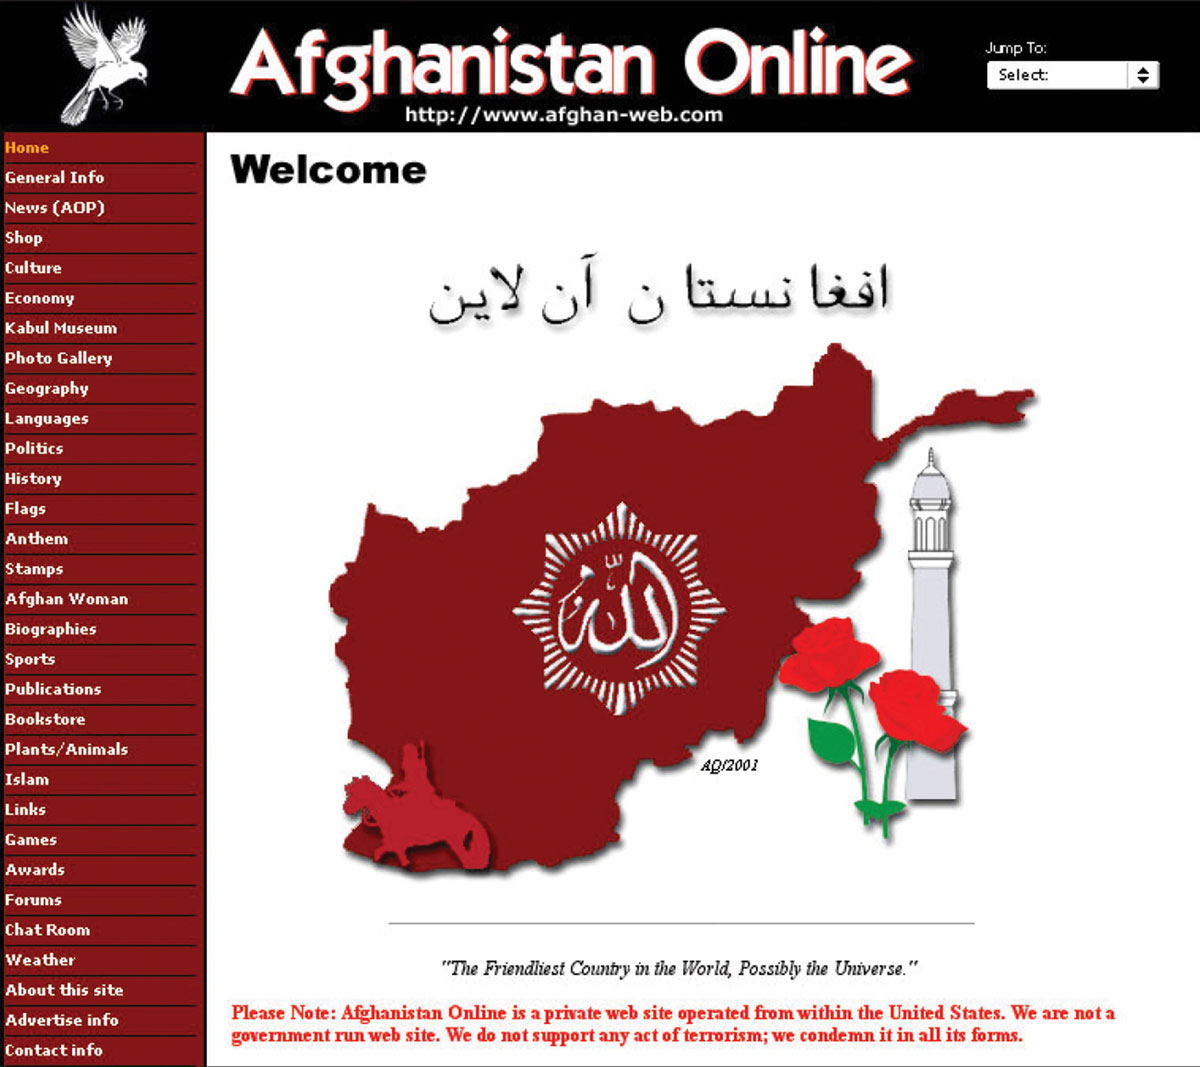 Afganistan Online webpage from the Internet Archive.